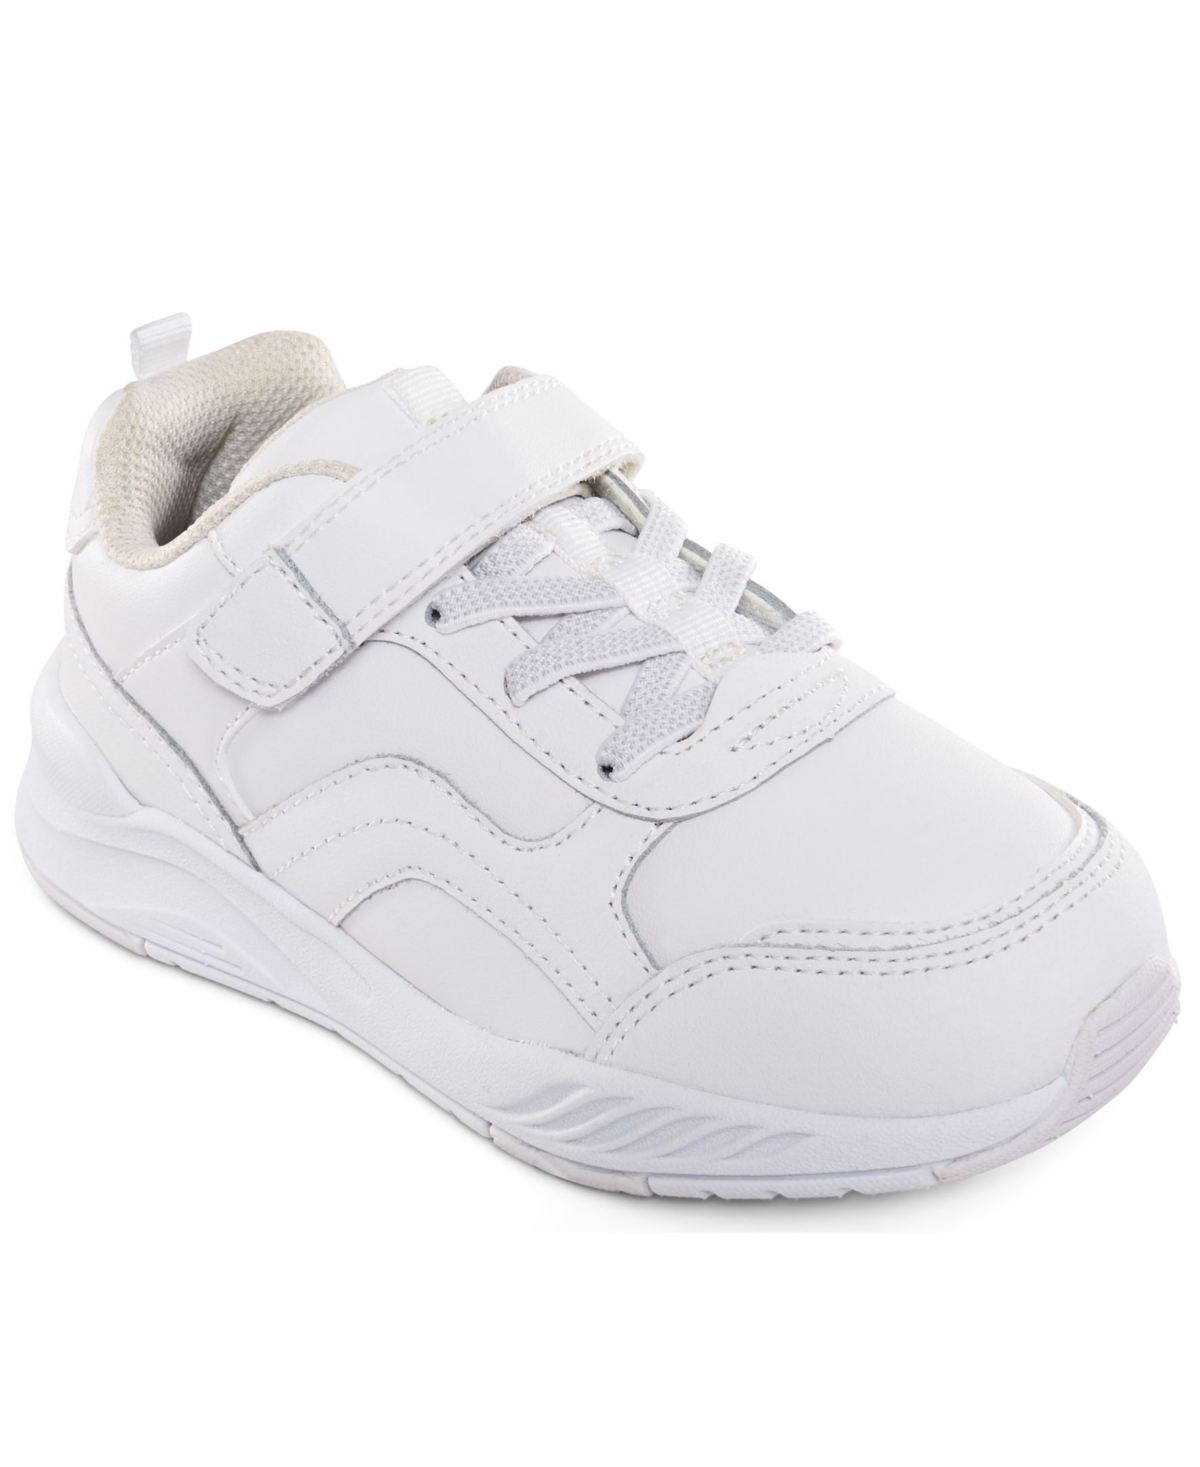 STRIDE RITE TODDLER BOYS MADE TO PLAY BRIGHTON SNEAKERS